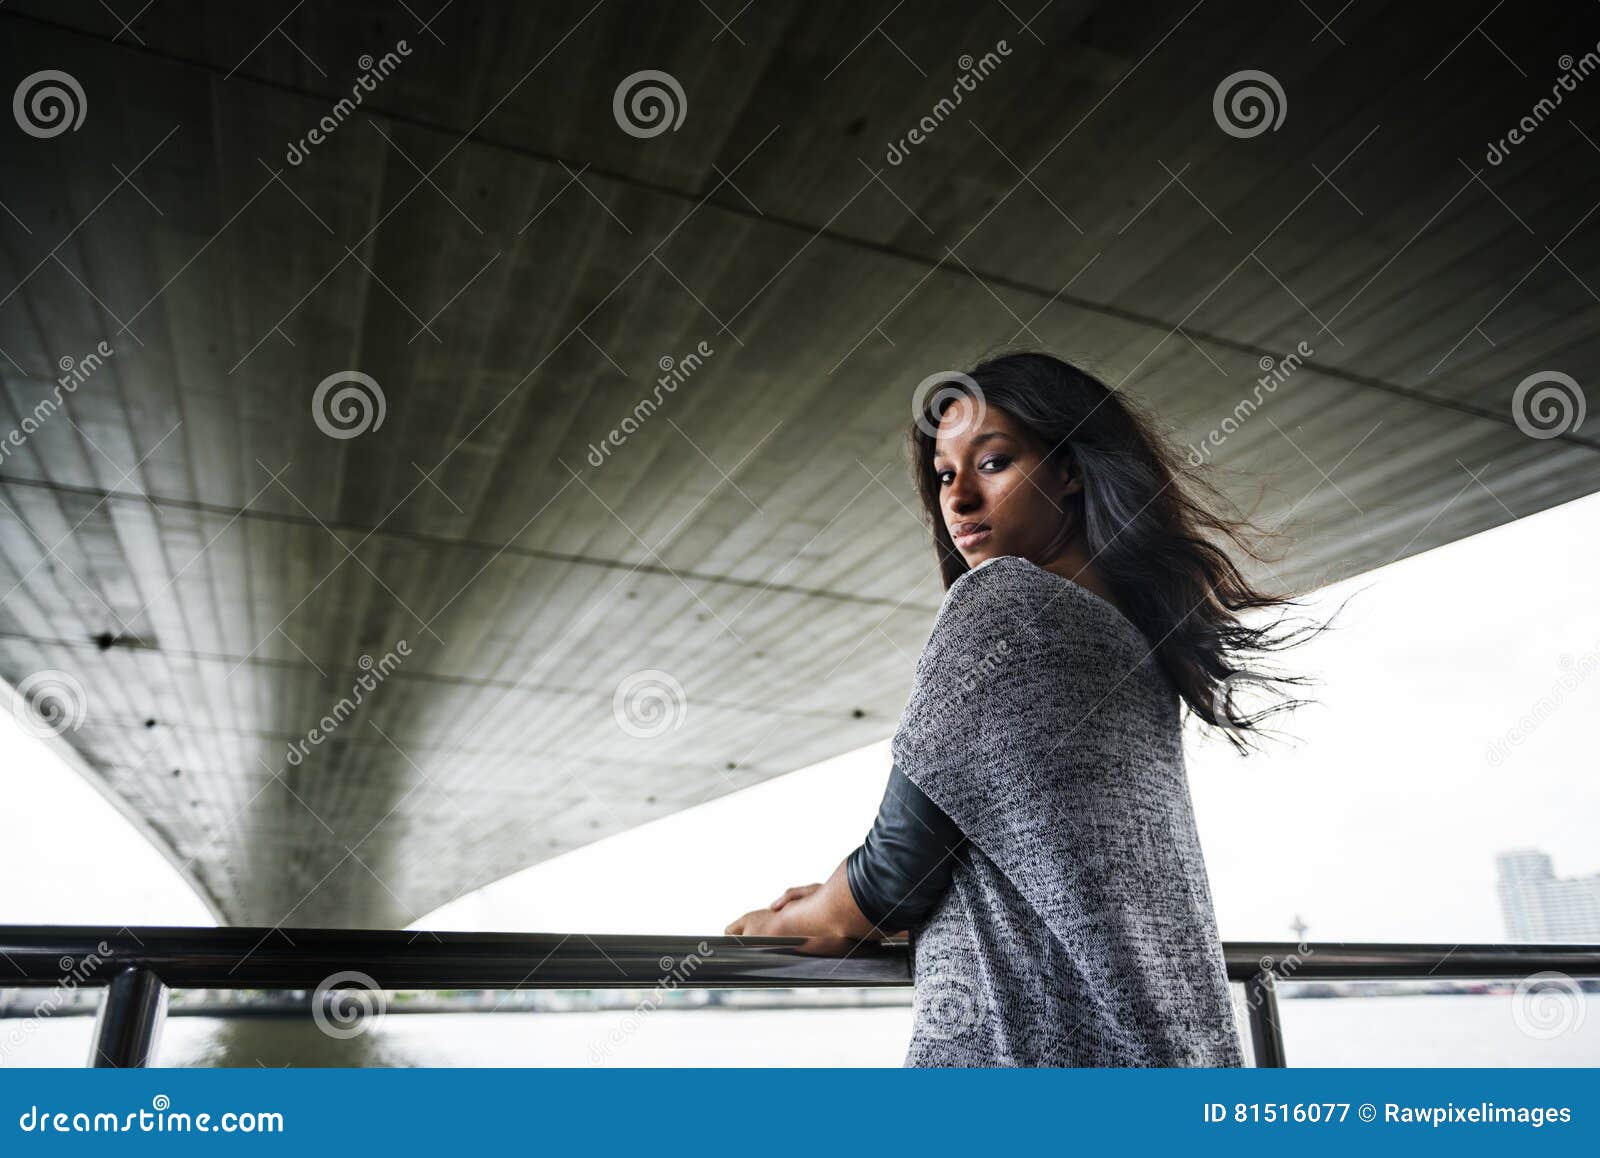 African Woman Thinking River Serene Concept Stock Image - Image of ...